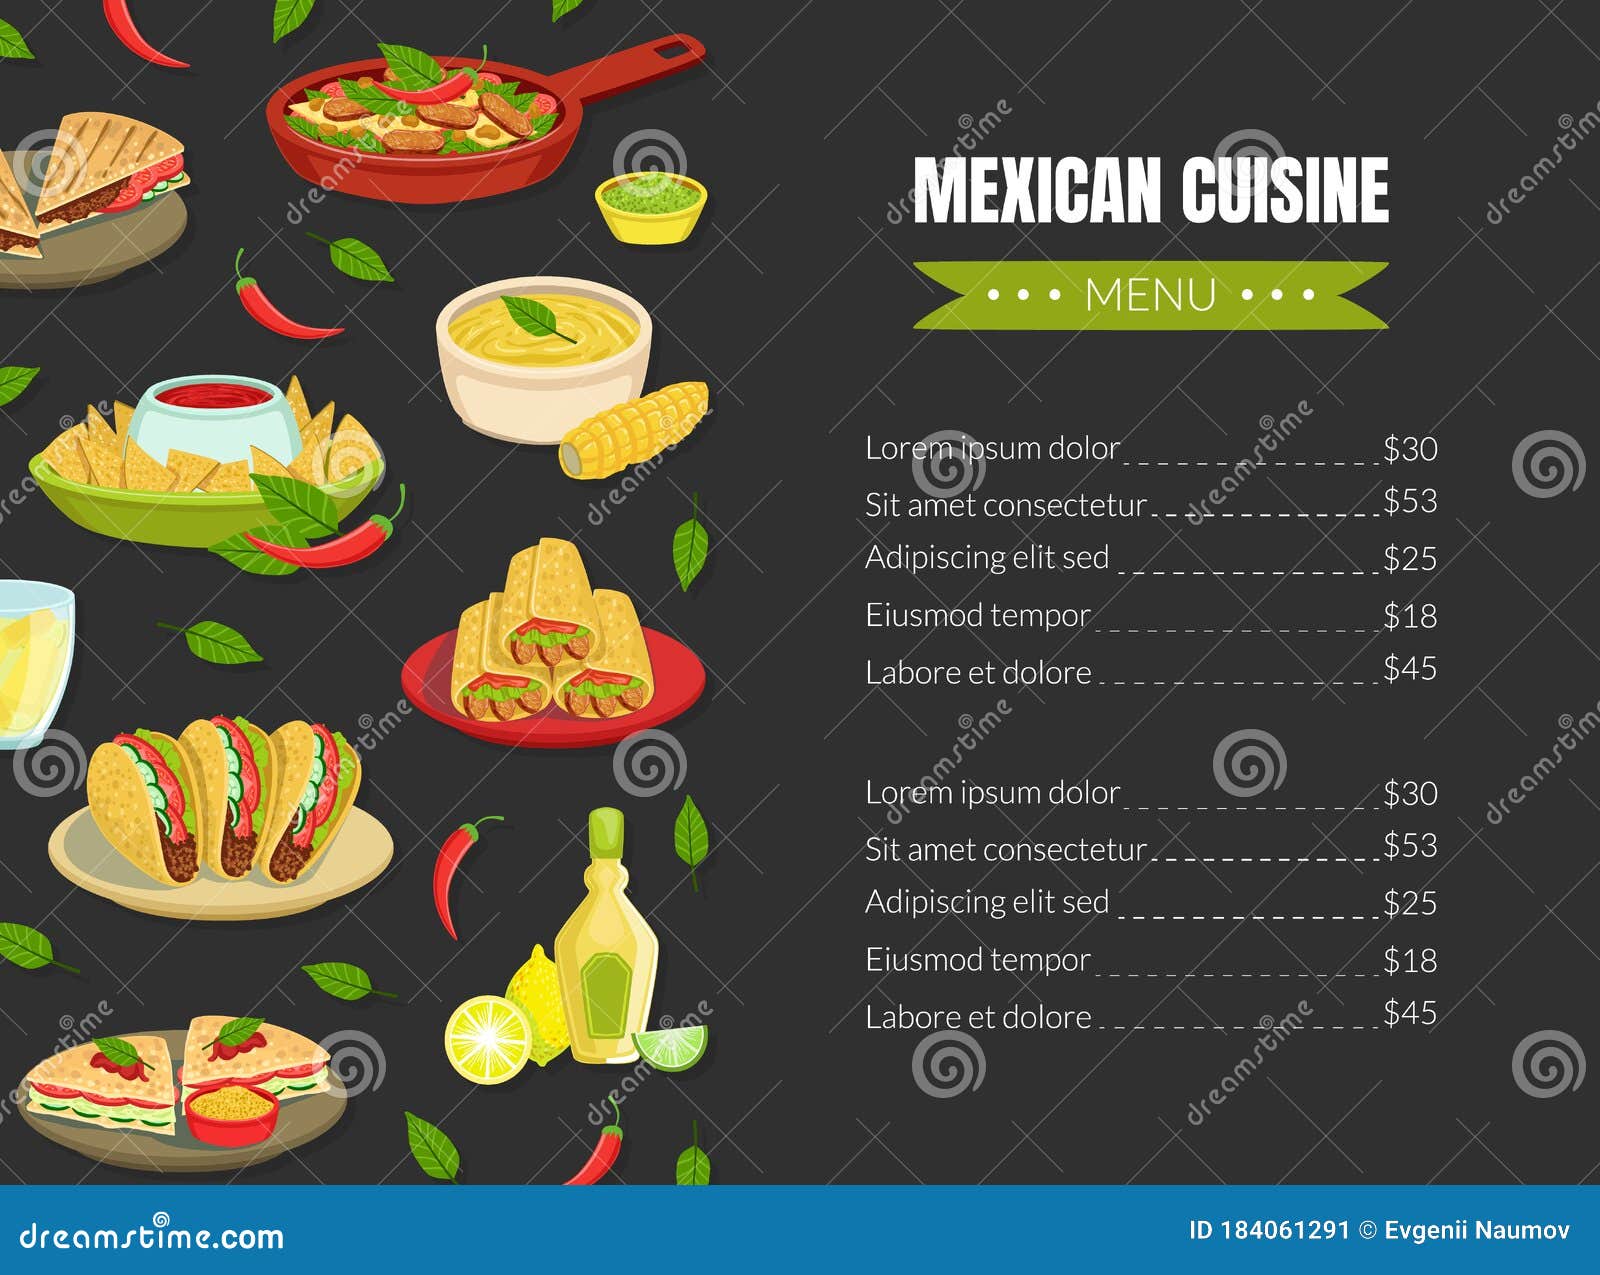 Mexican Traditional Food Menu Template, Mexican Cuisine Takeaway With Mexican Menu Template Free Download